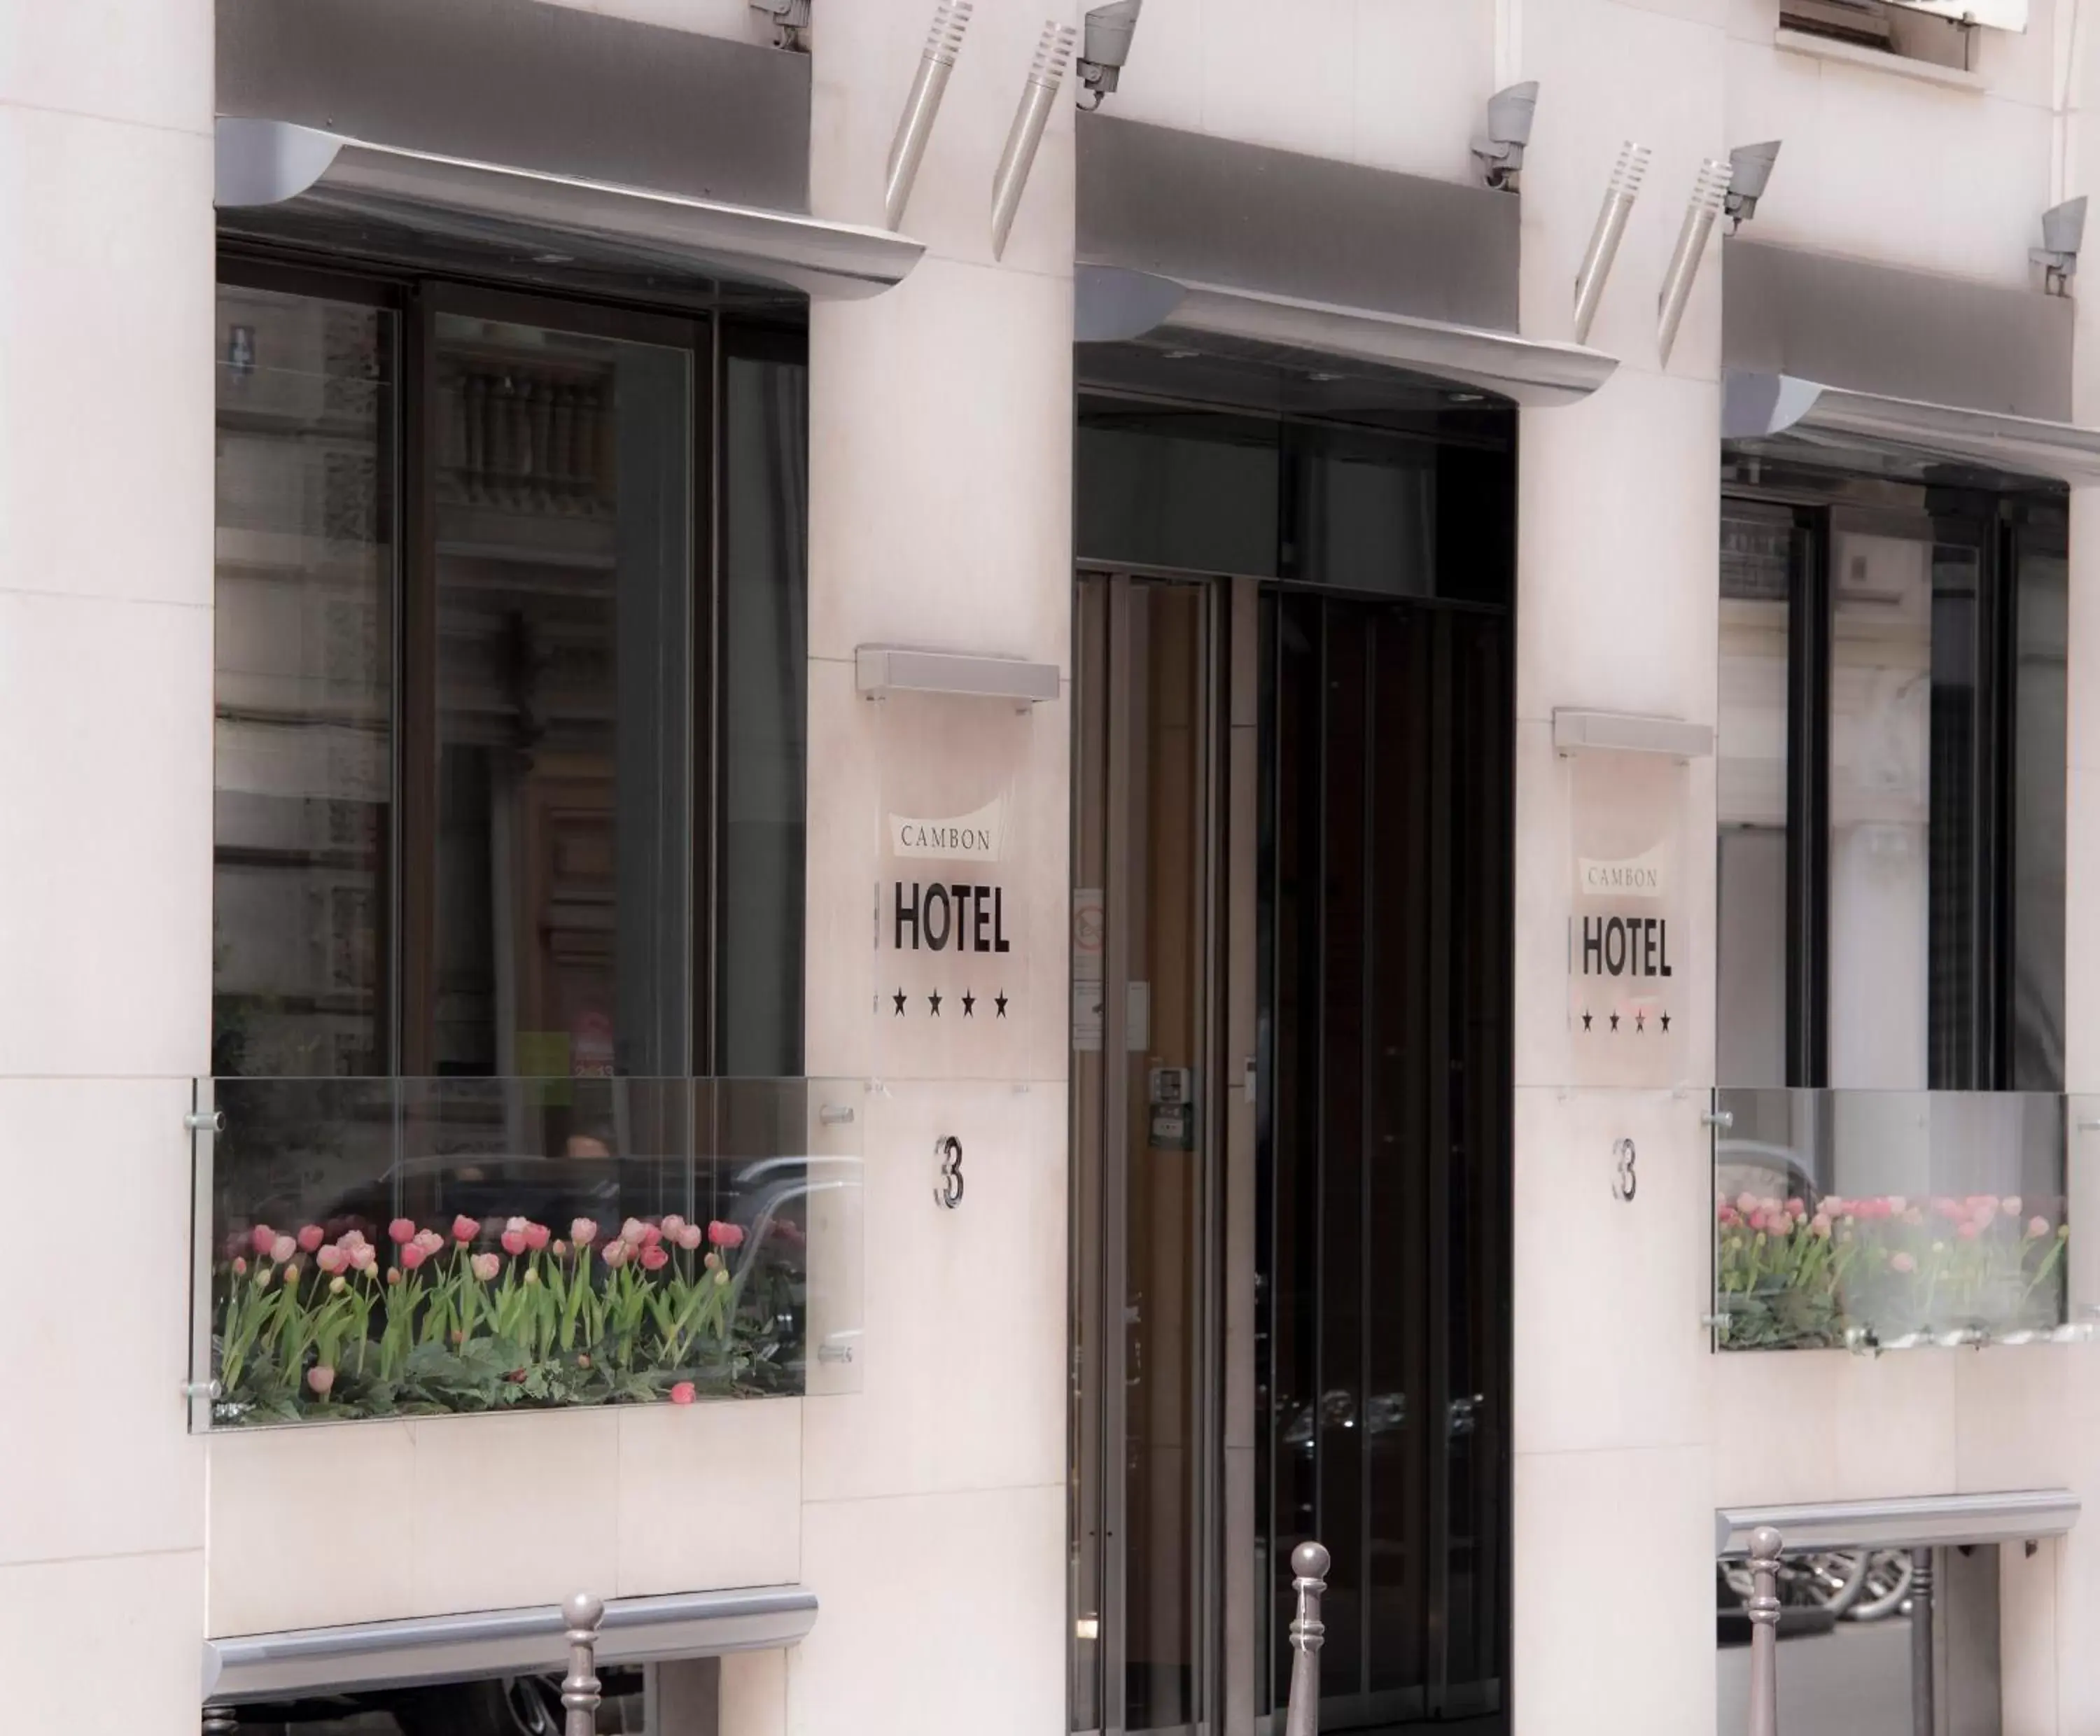 Property building in Hotel Cambon